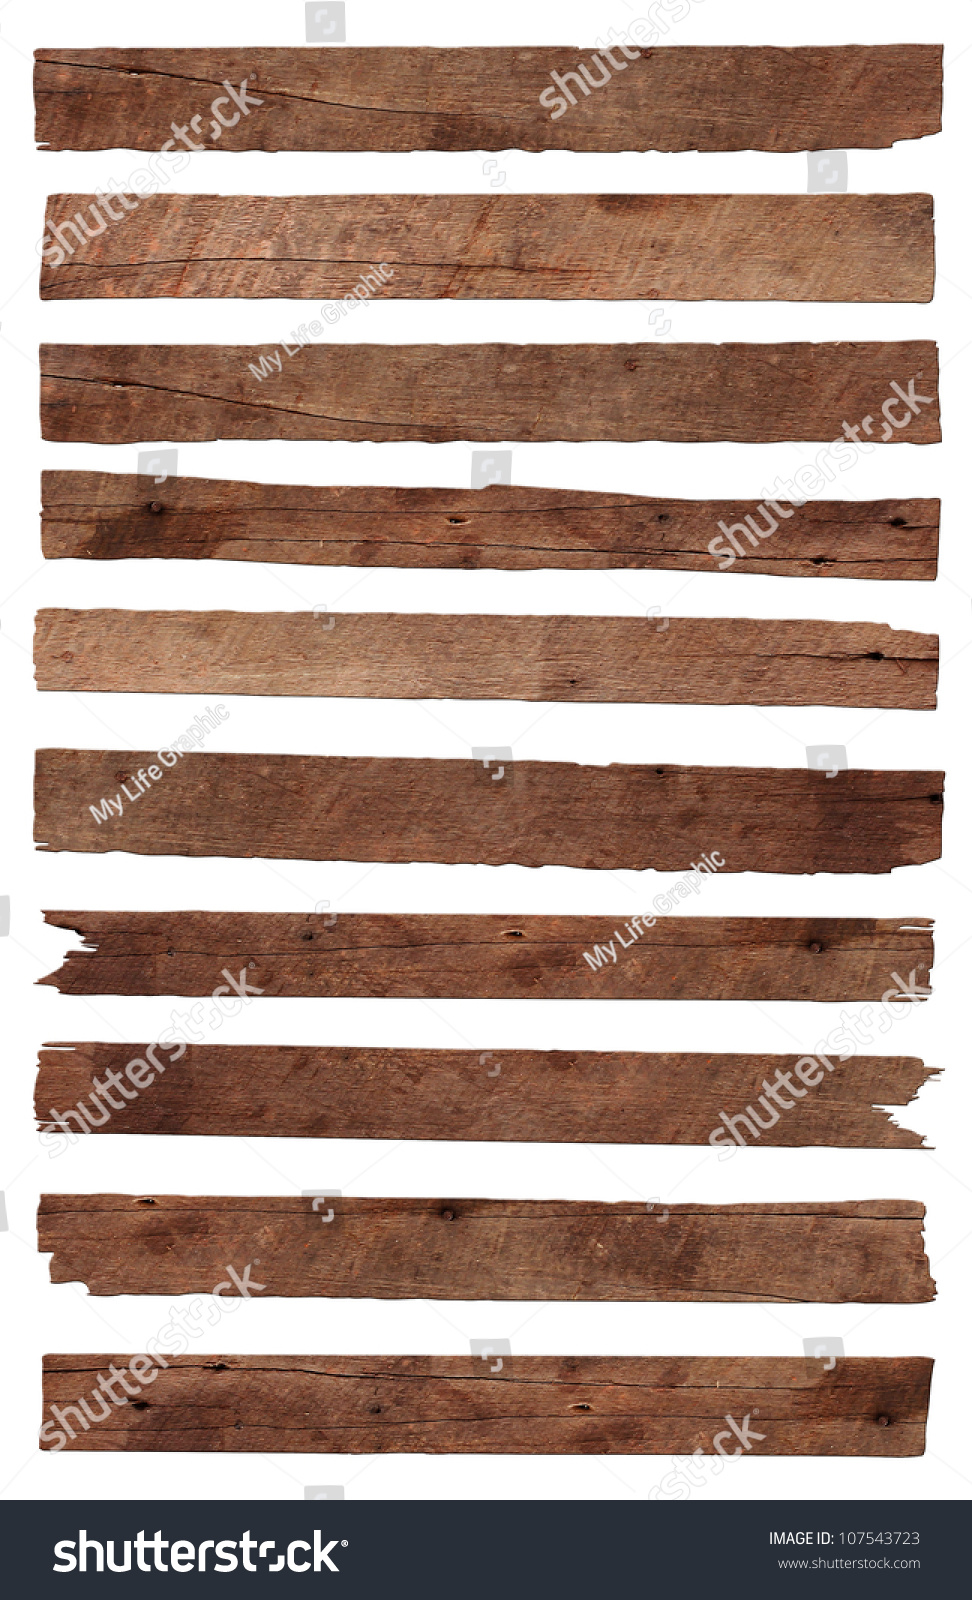 Old Wood plank, isolated on white background (Save Paths For design work) #107543723